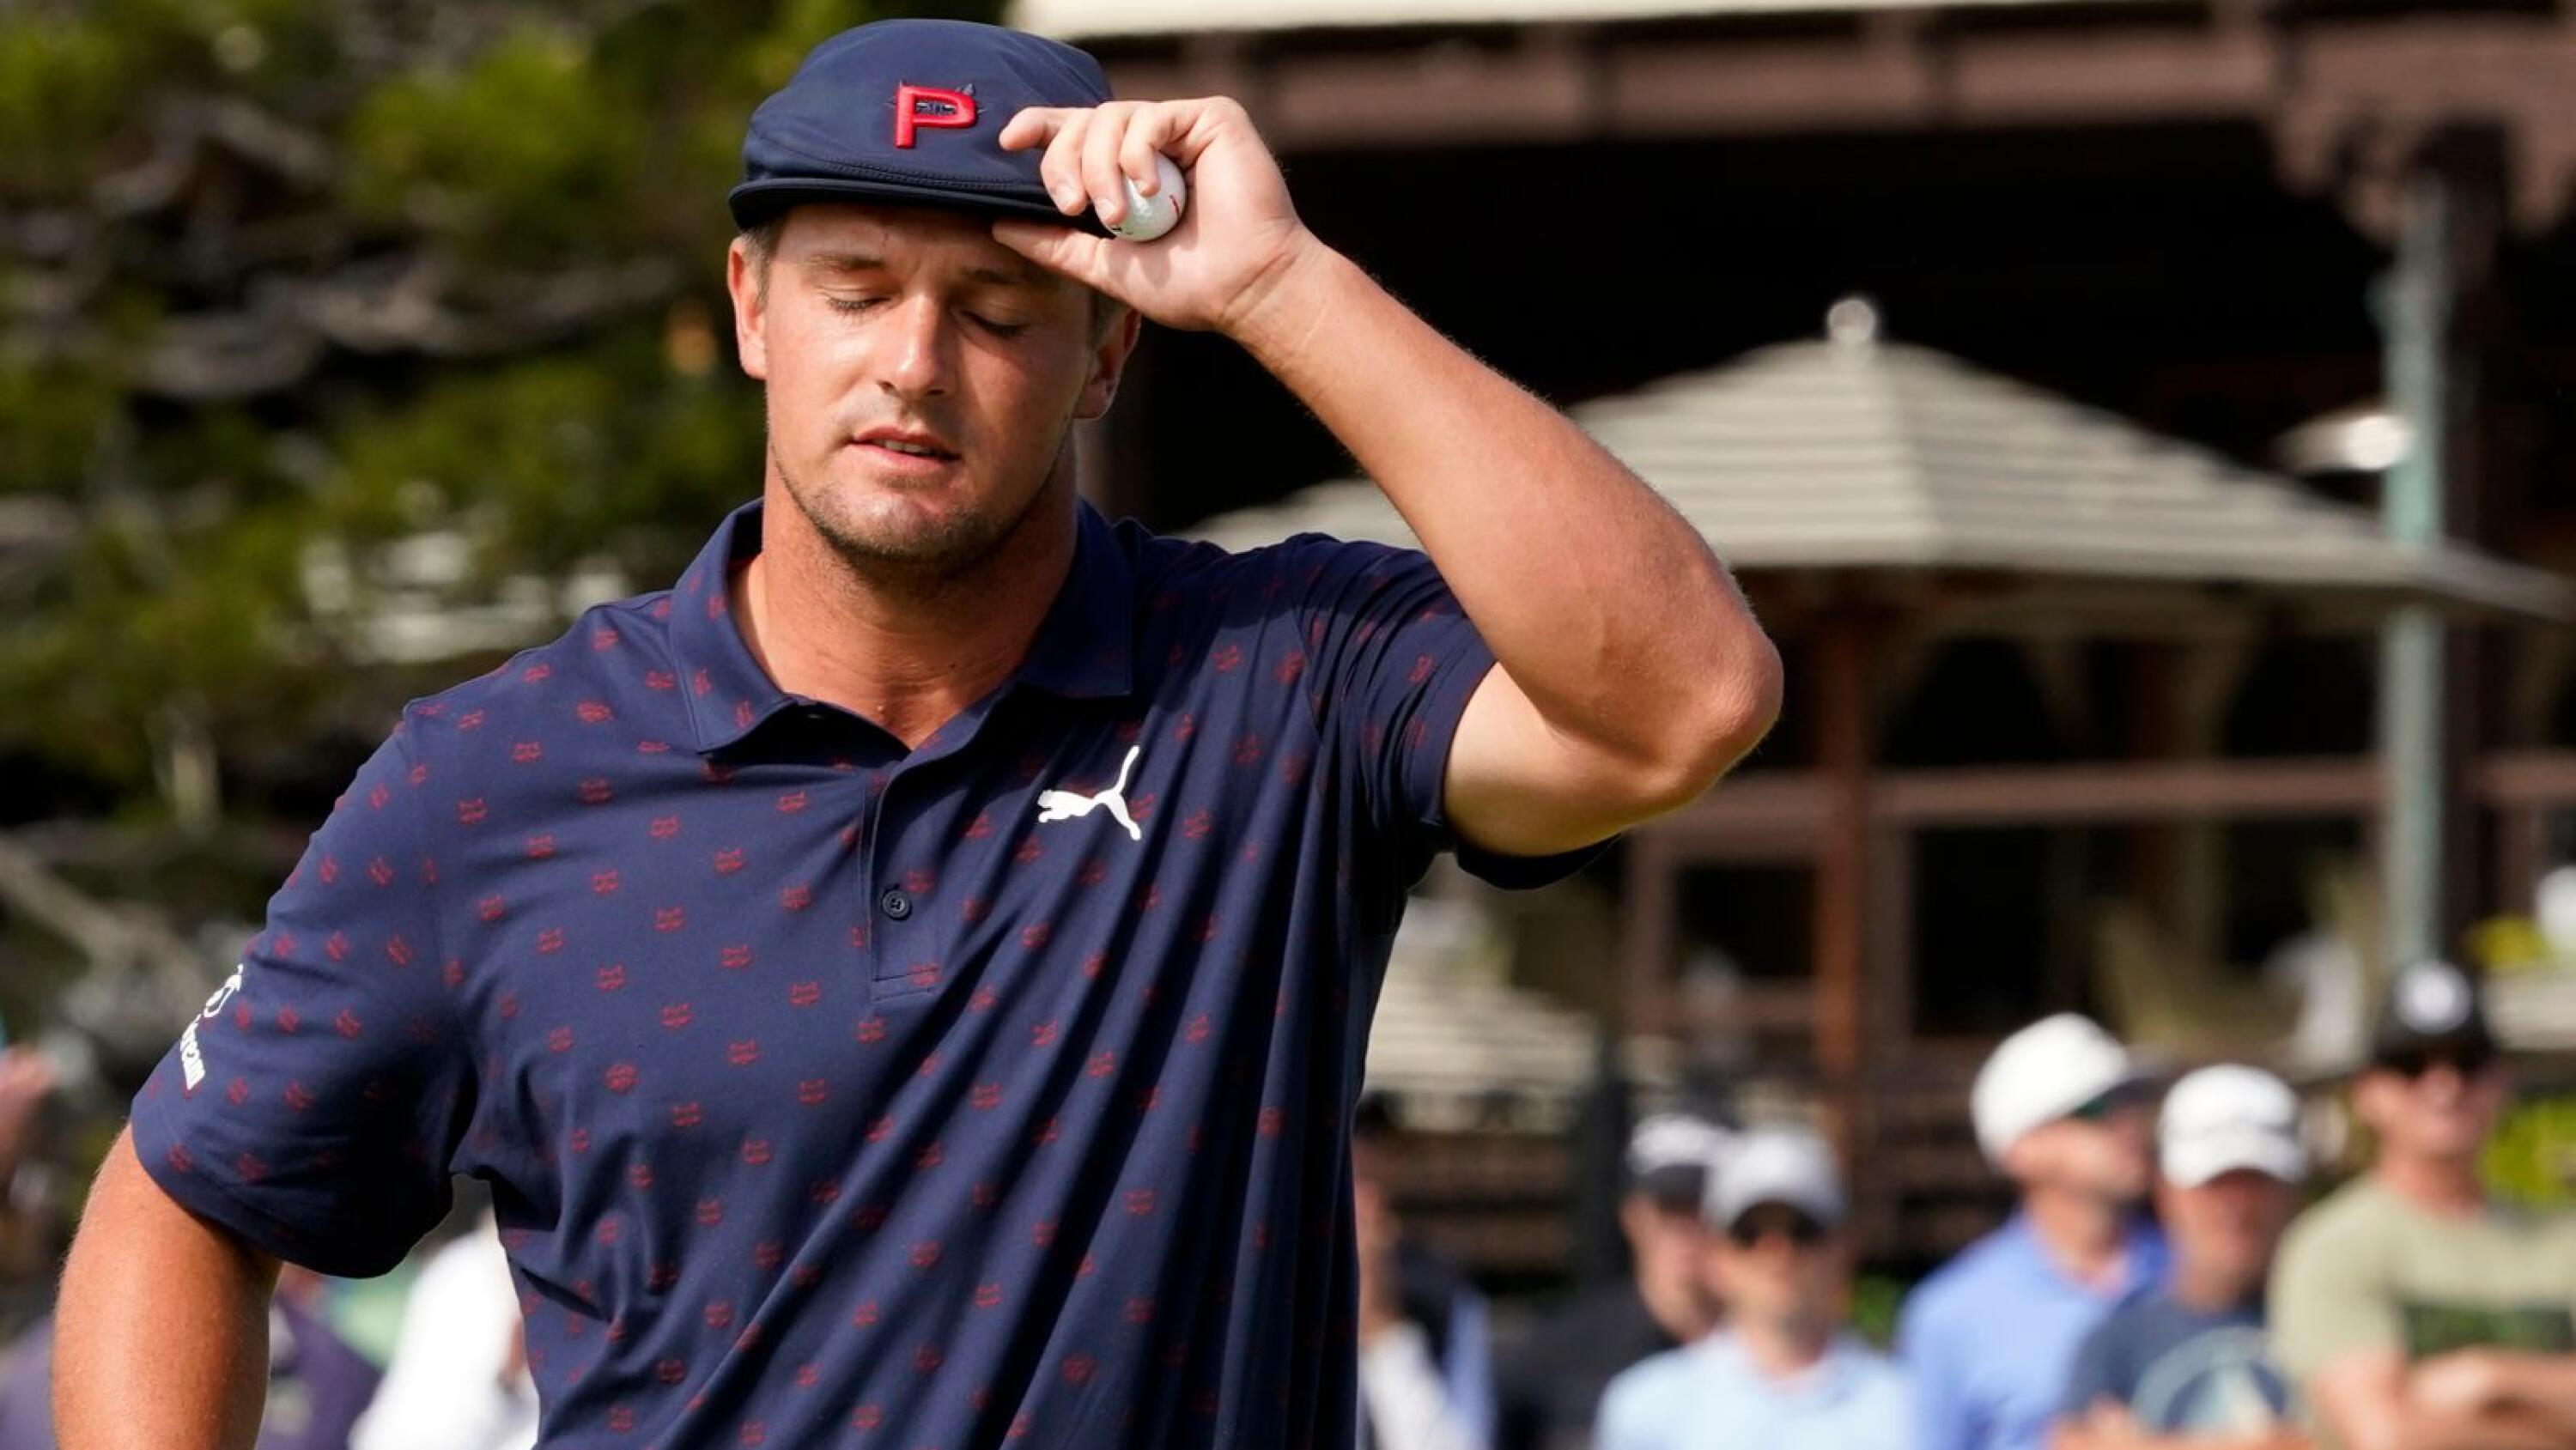 Bryson DeChambeau tips his hat after putting out on the 18th green during the third round of the US Open golf tournament at Torrey Pines Golf Course